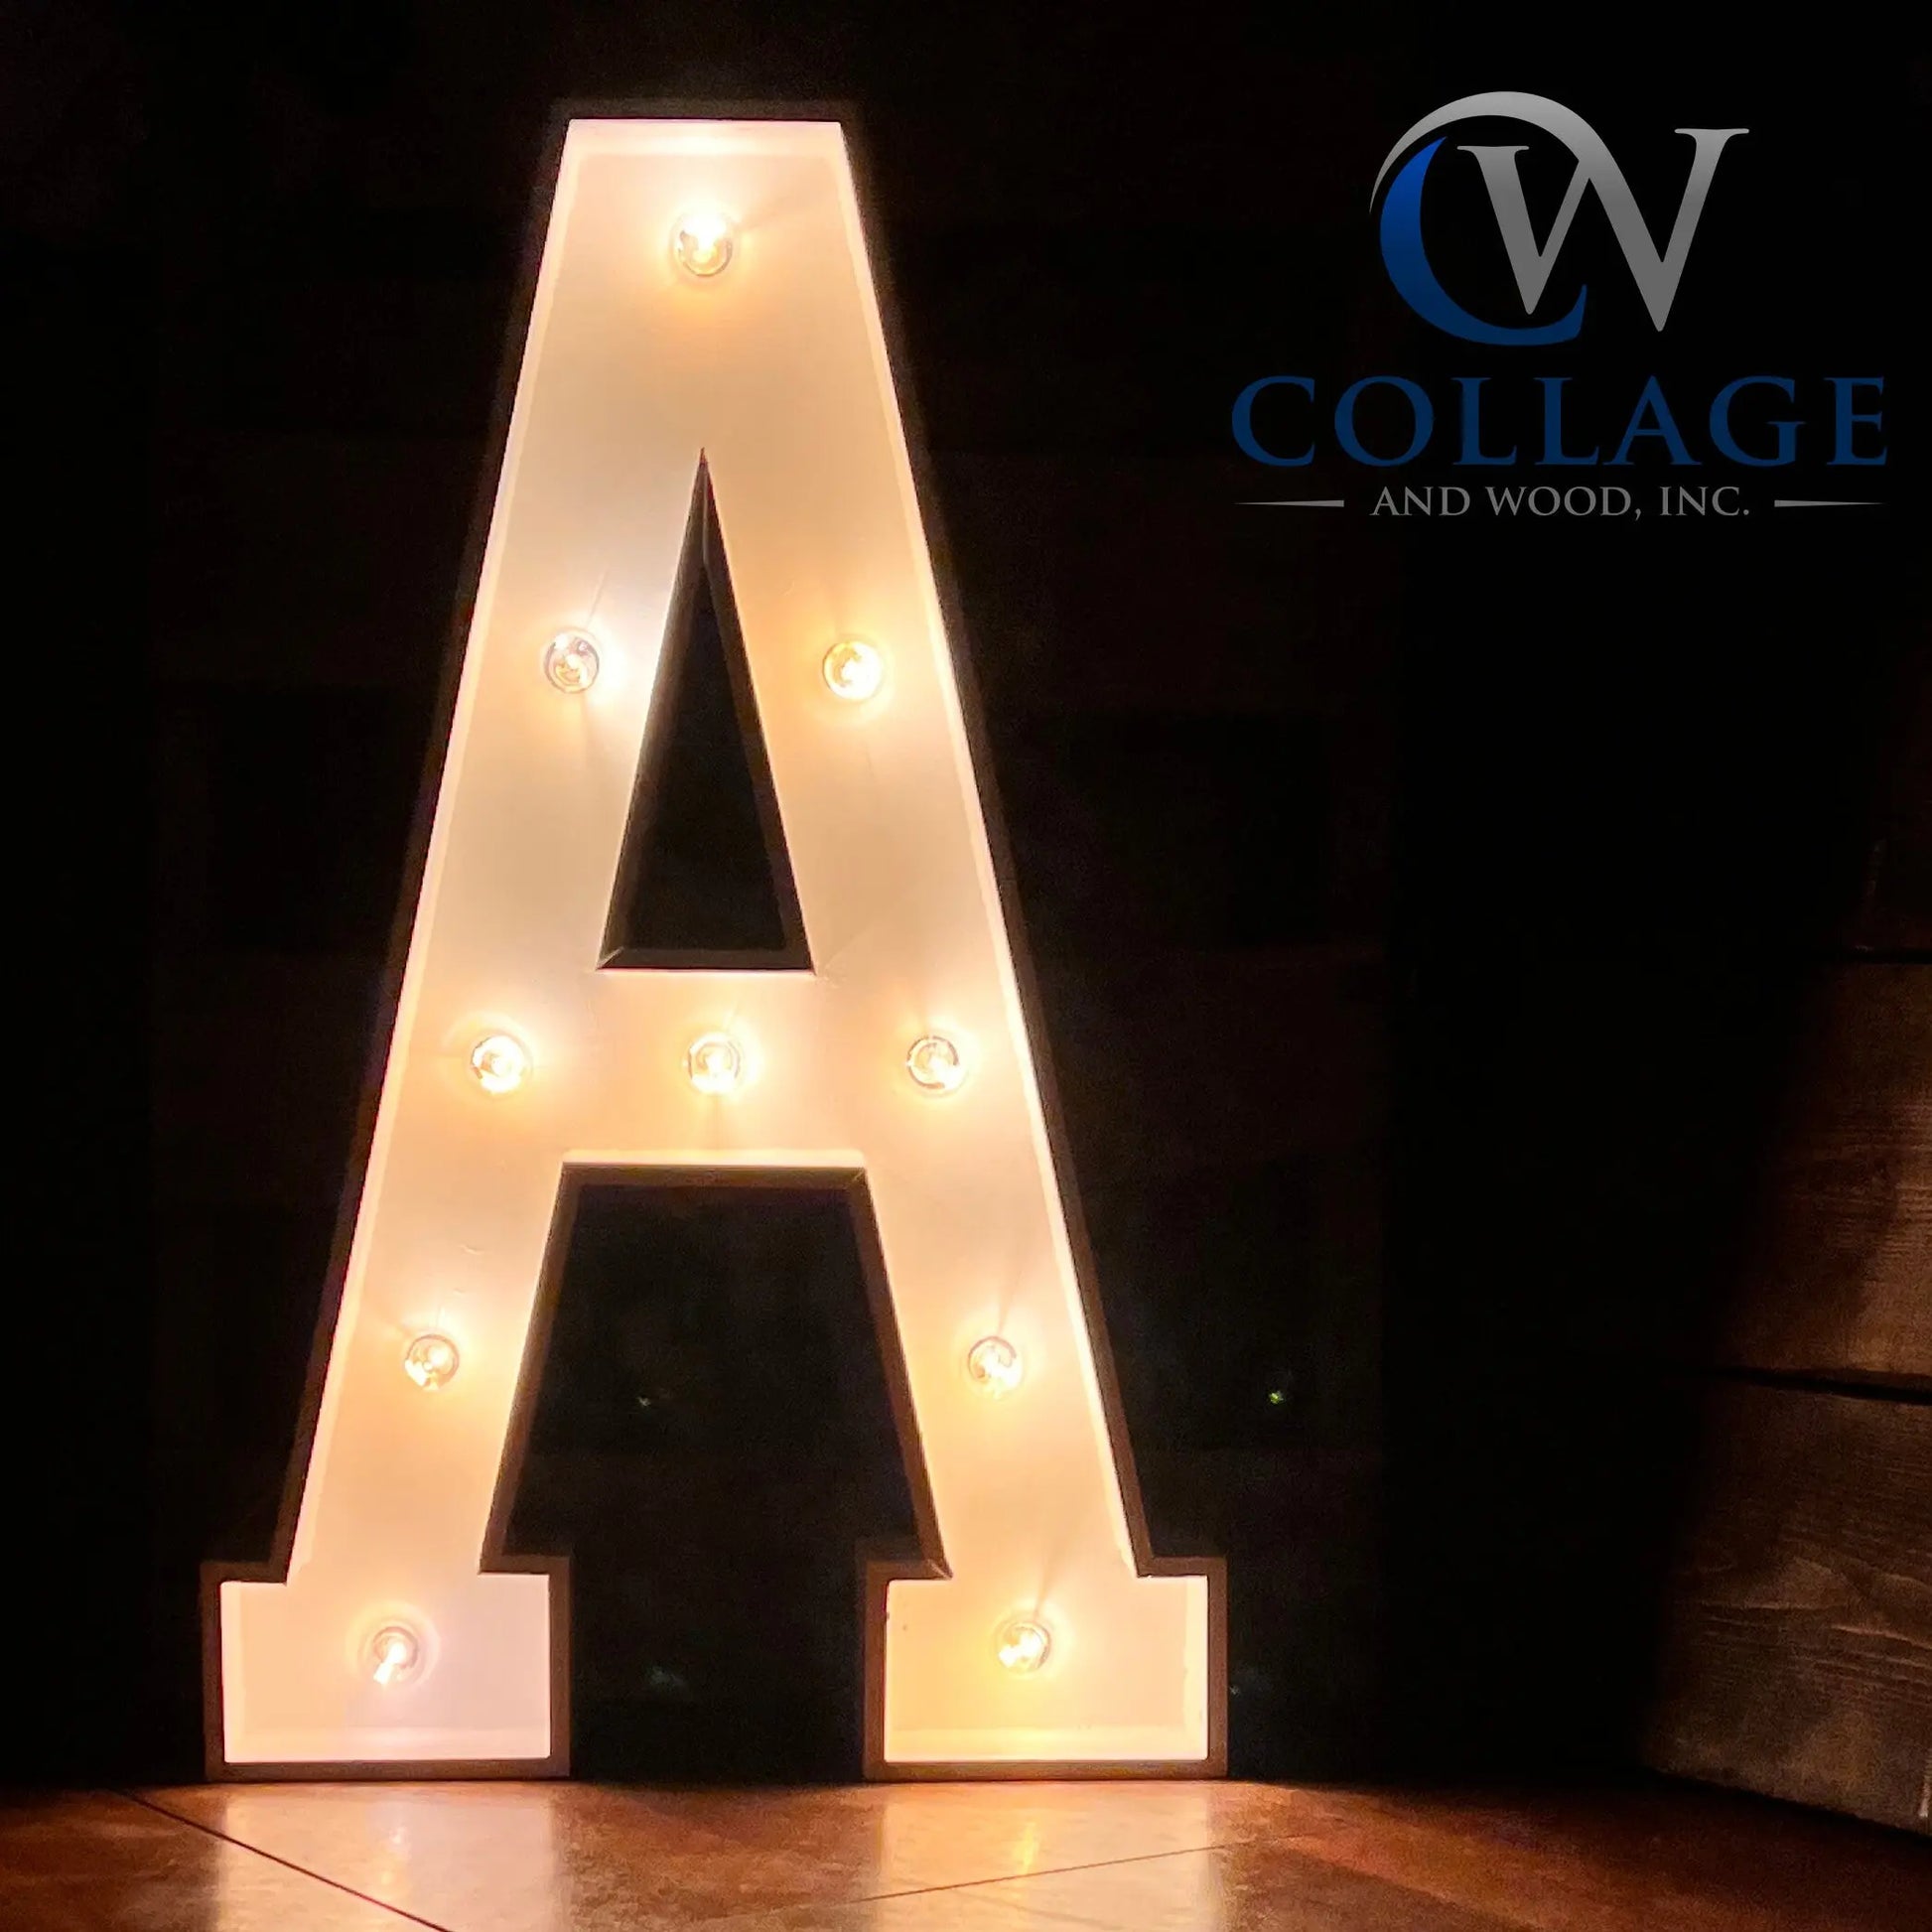 A - Amazingly crafted 3-foot tall wooden marquee letter A, elegantly painted white with brilliant battery-powered LED lights.